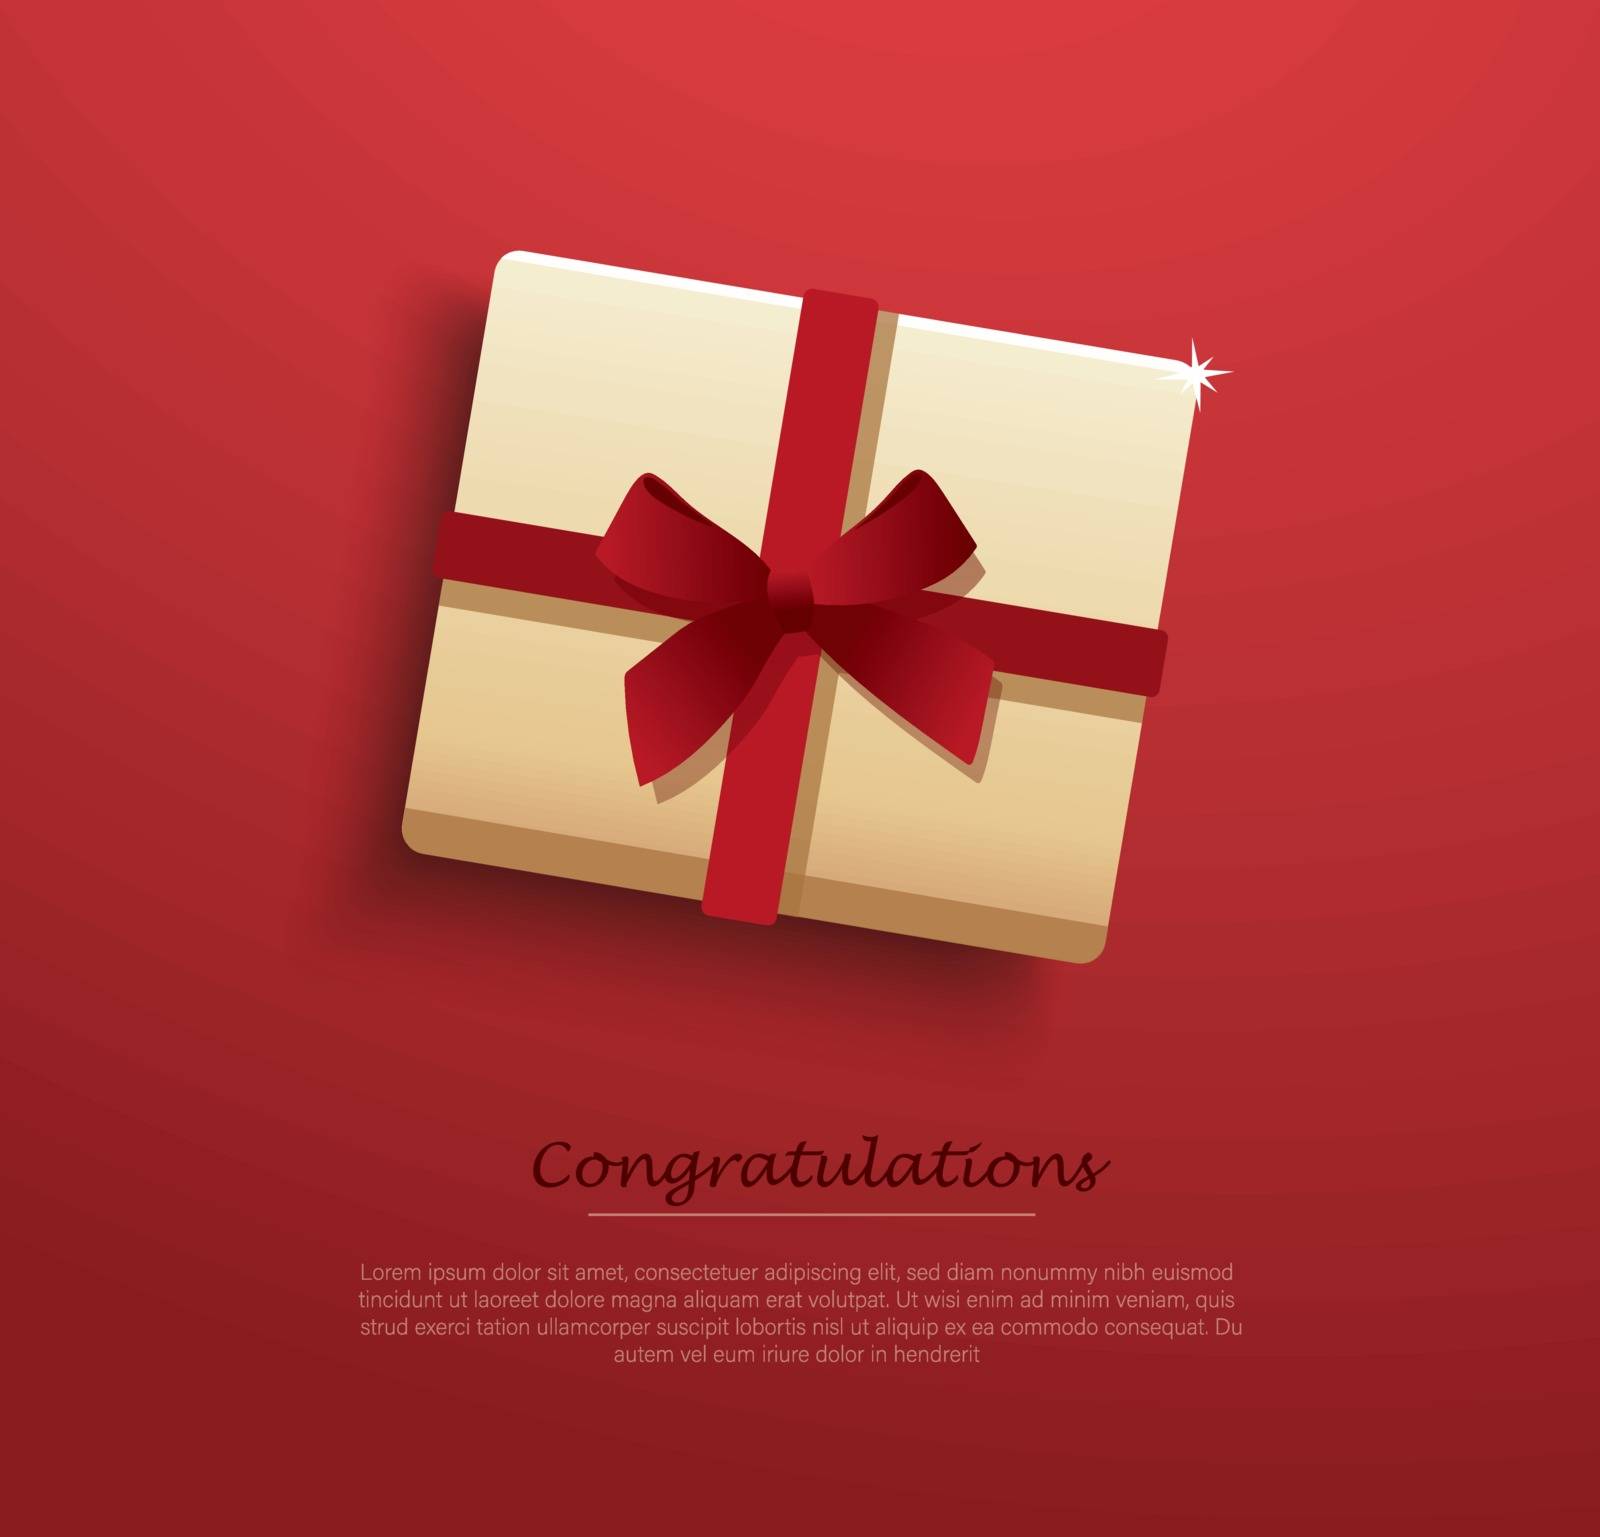 present box decorated with red bow vector illustration by h-santima